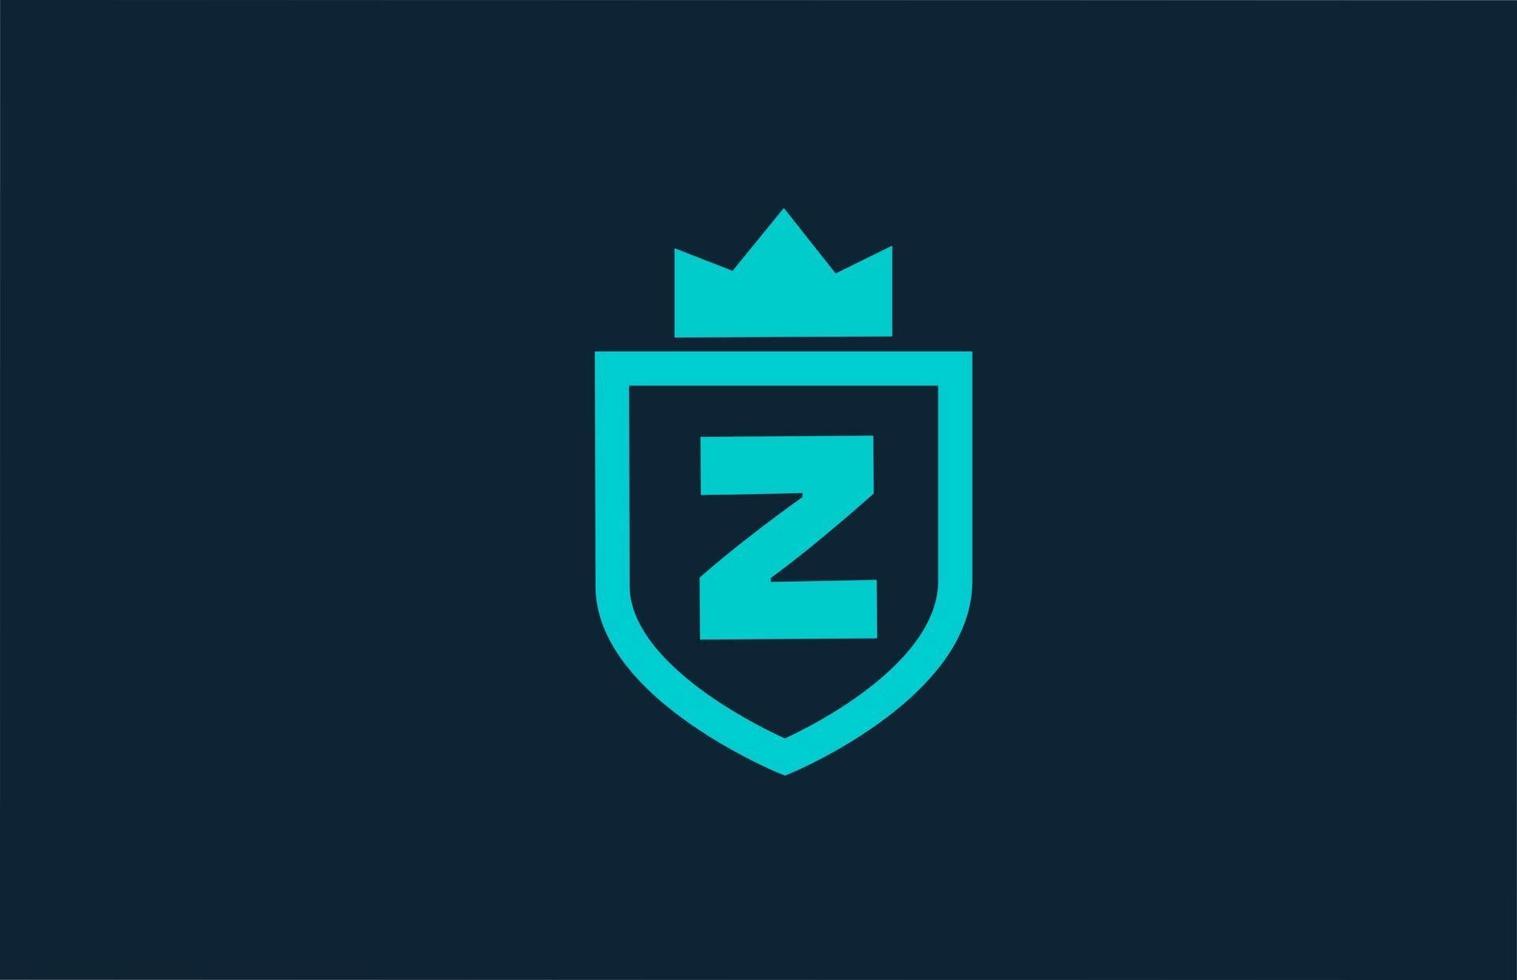 Z blue shield alphabet icon logo for company with letter. Creative design for corporate and business with king crown vector